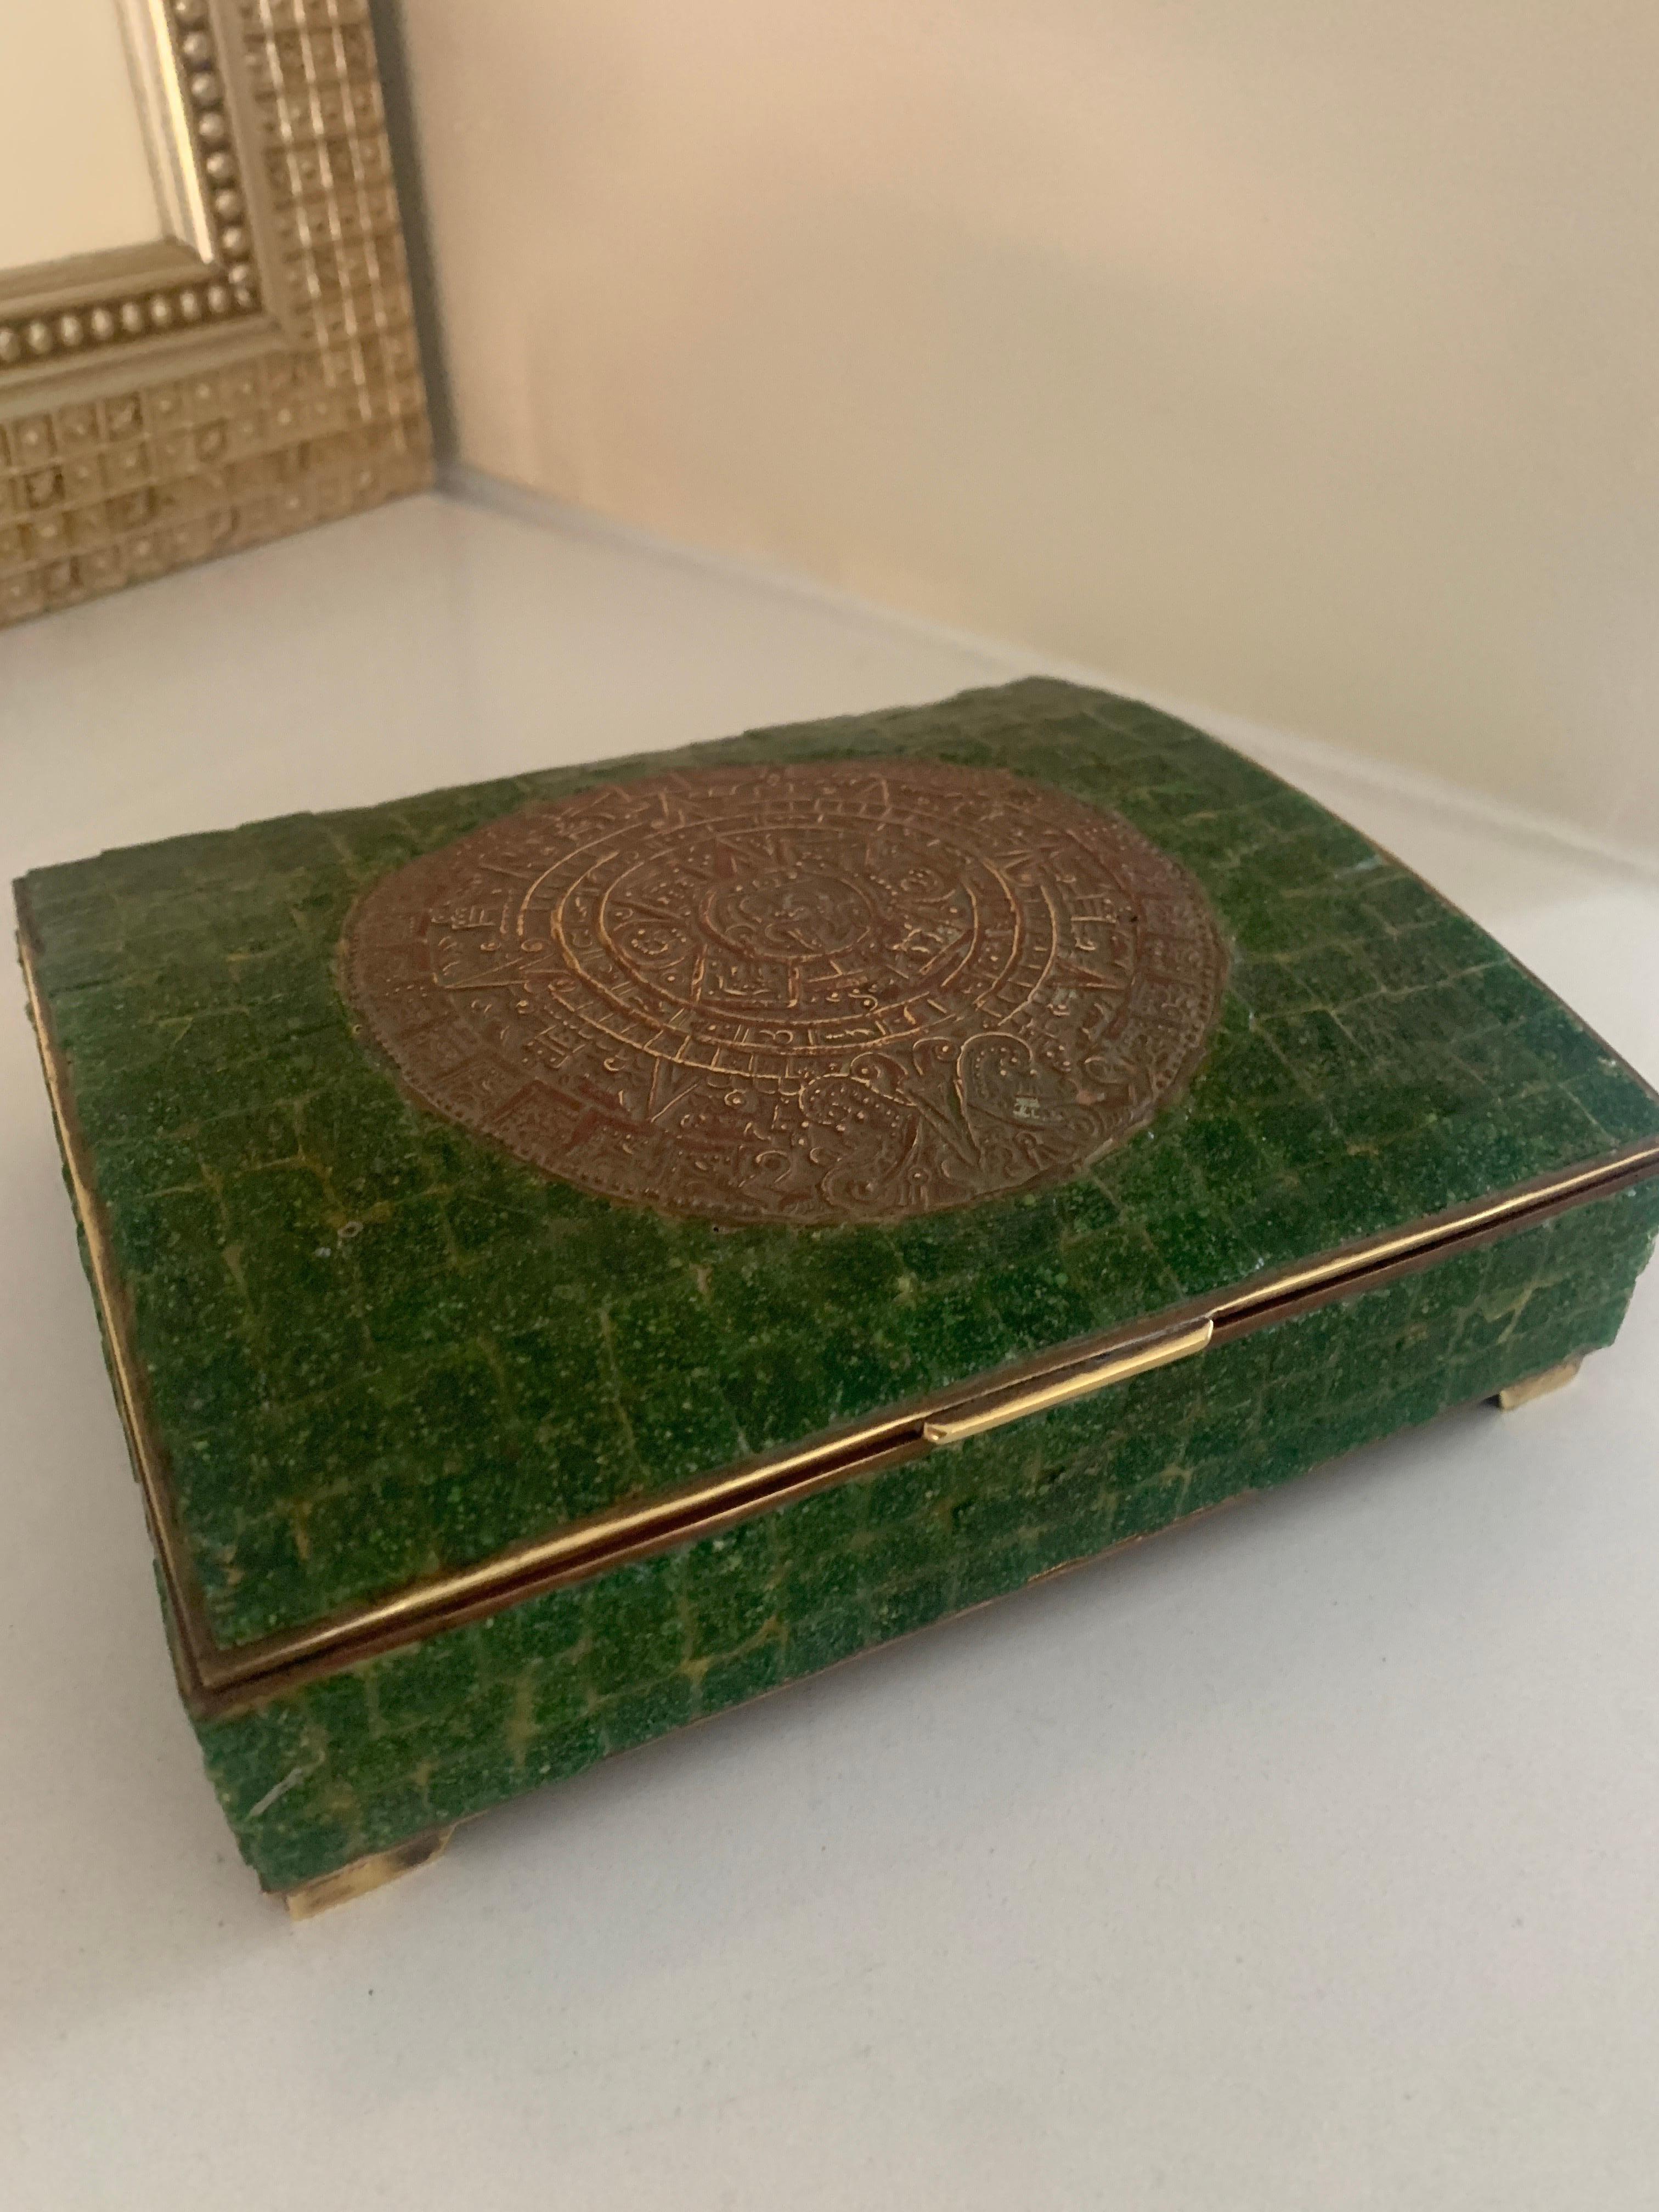 Hand made Mexican brass and stone box with medallion - in the style of Los Castillo or Pepe Mendoza.

The brass box is lined in wood with exterior tiled green stone and brass inlayed Aztec Calendar. Most likely a cigarette box, however suitable